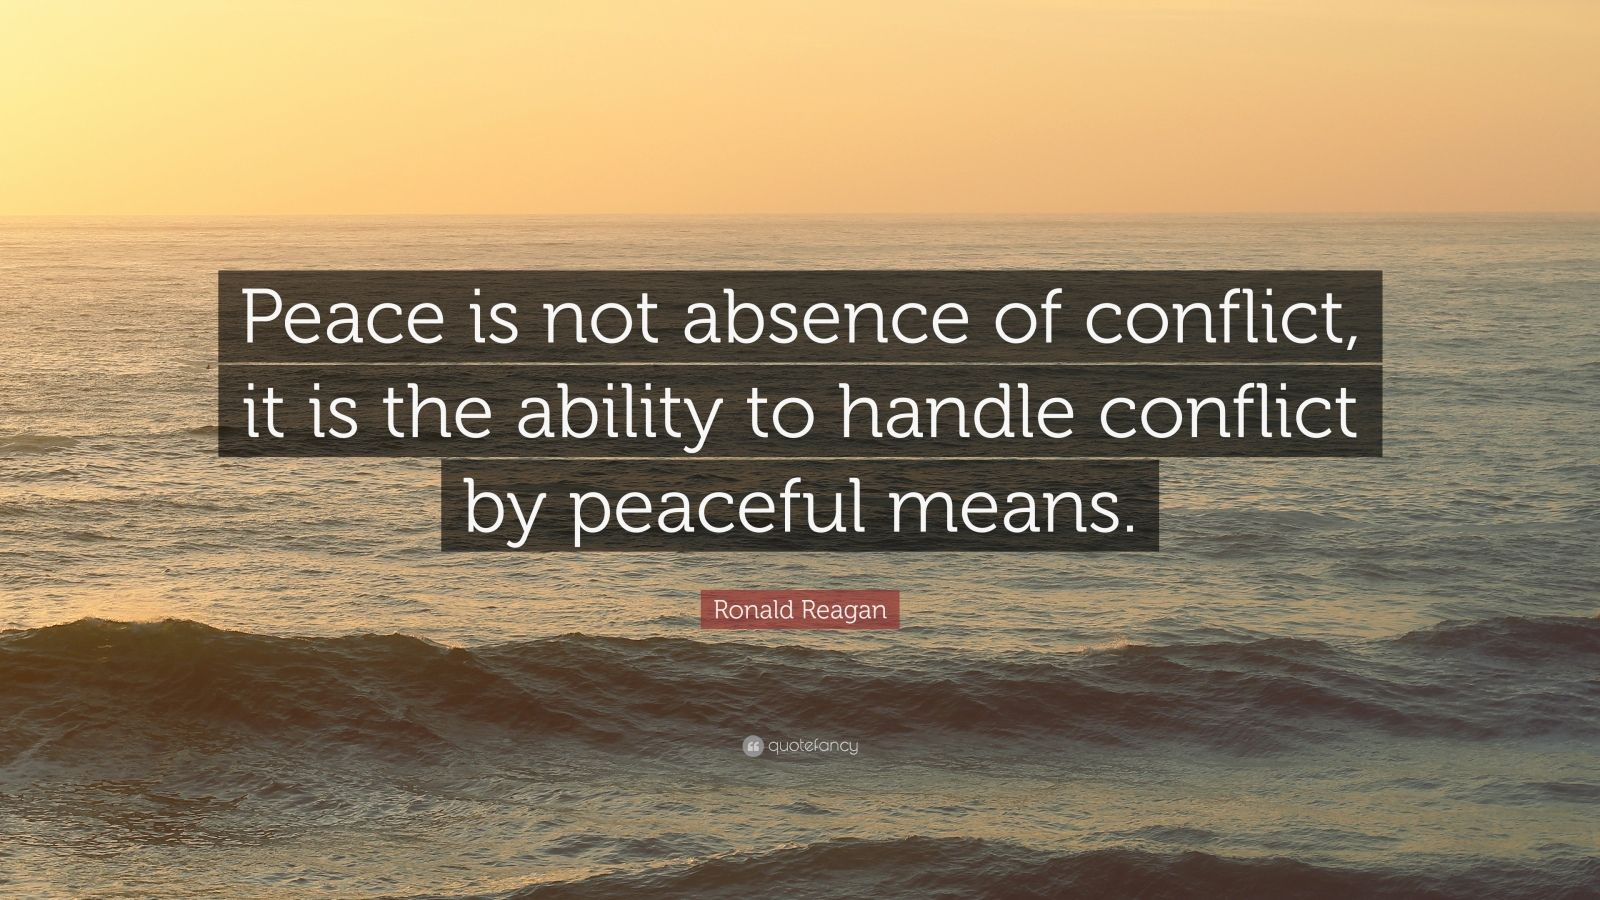 in global politics what is your opinion about peace and conflict